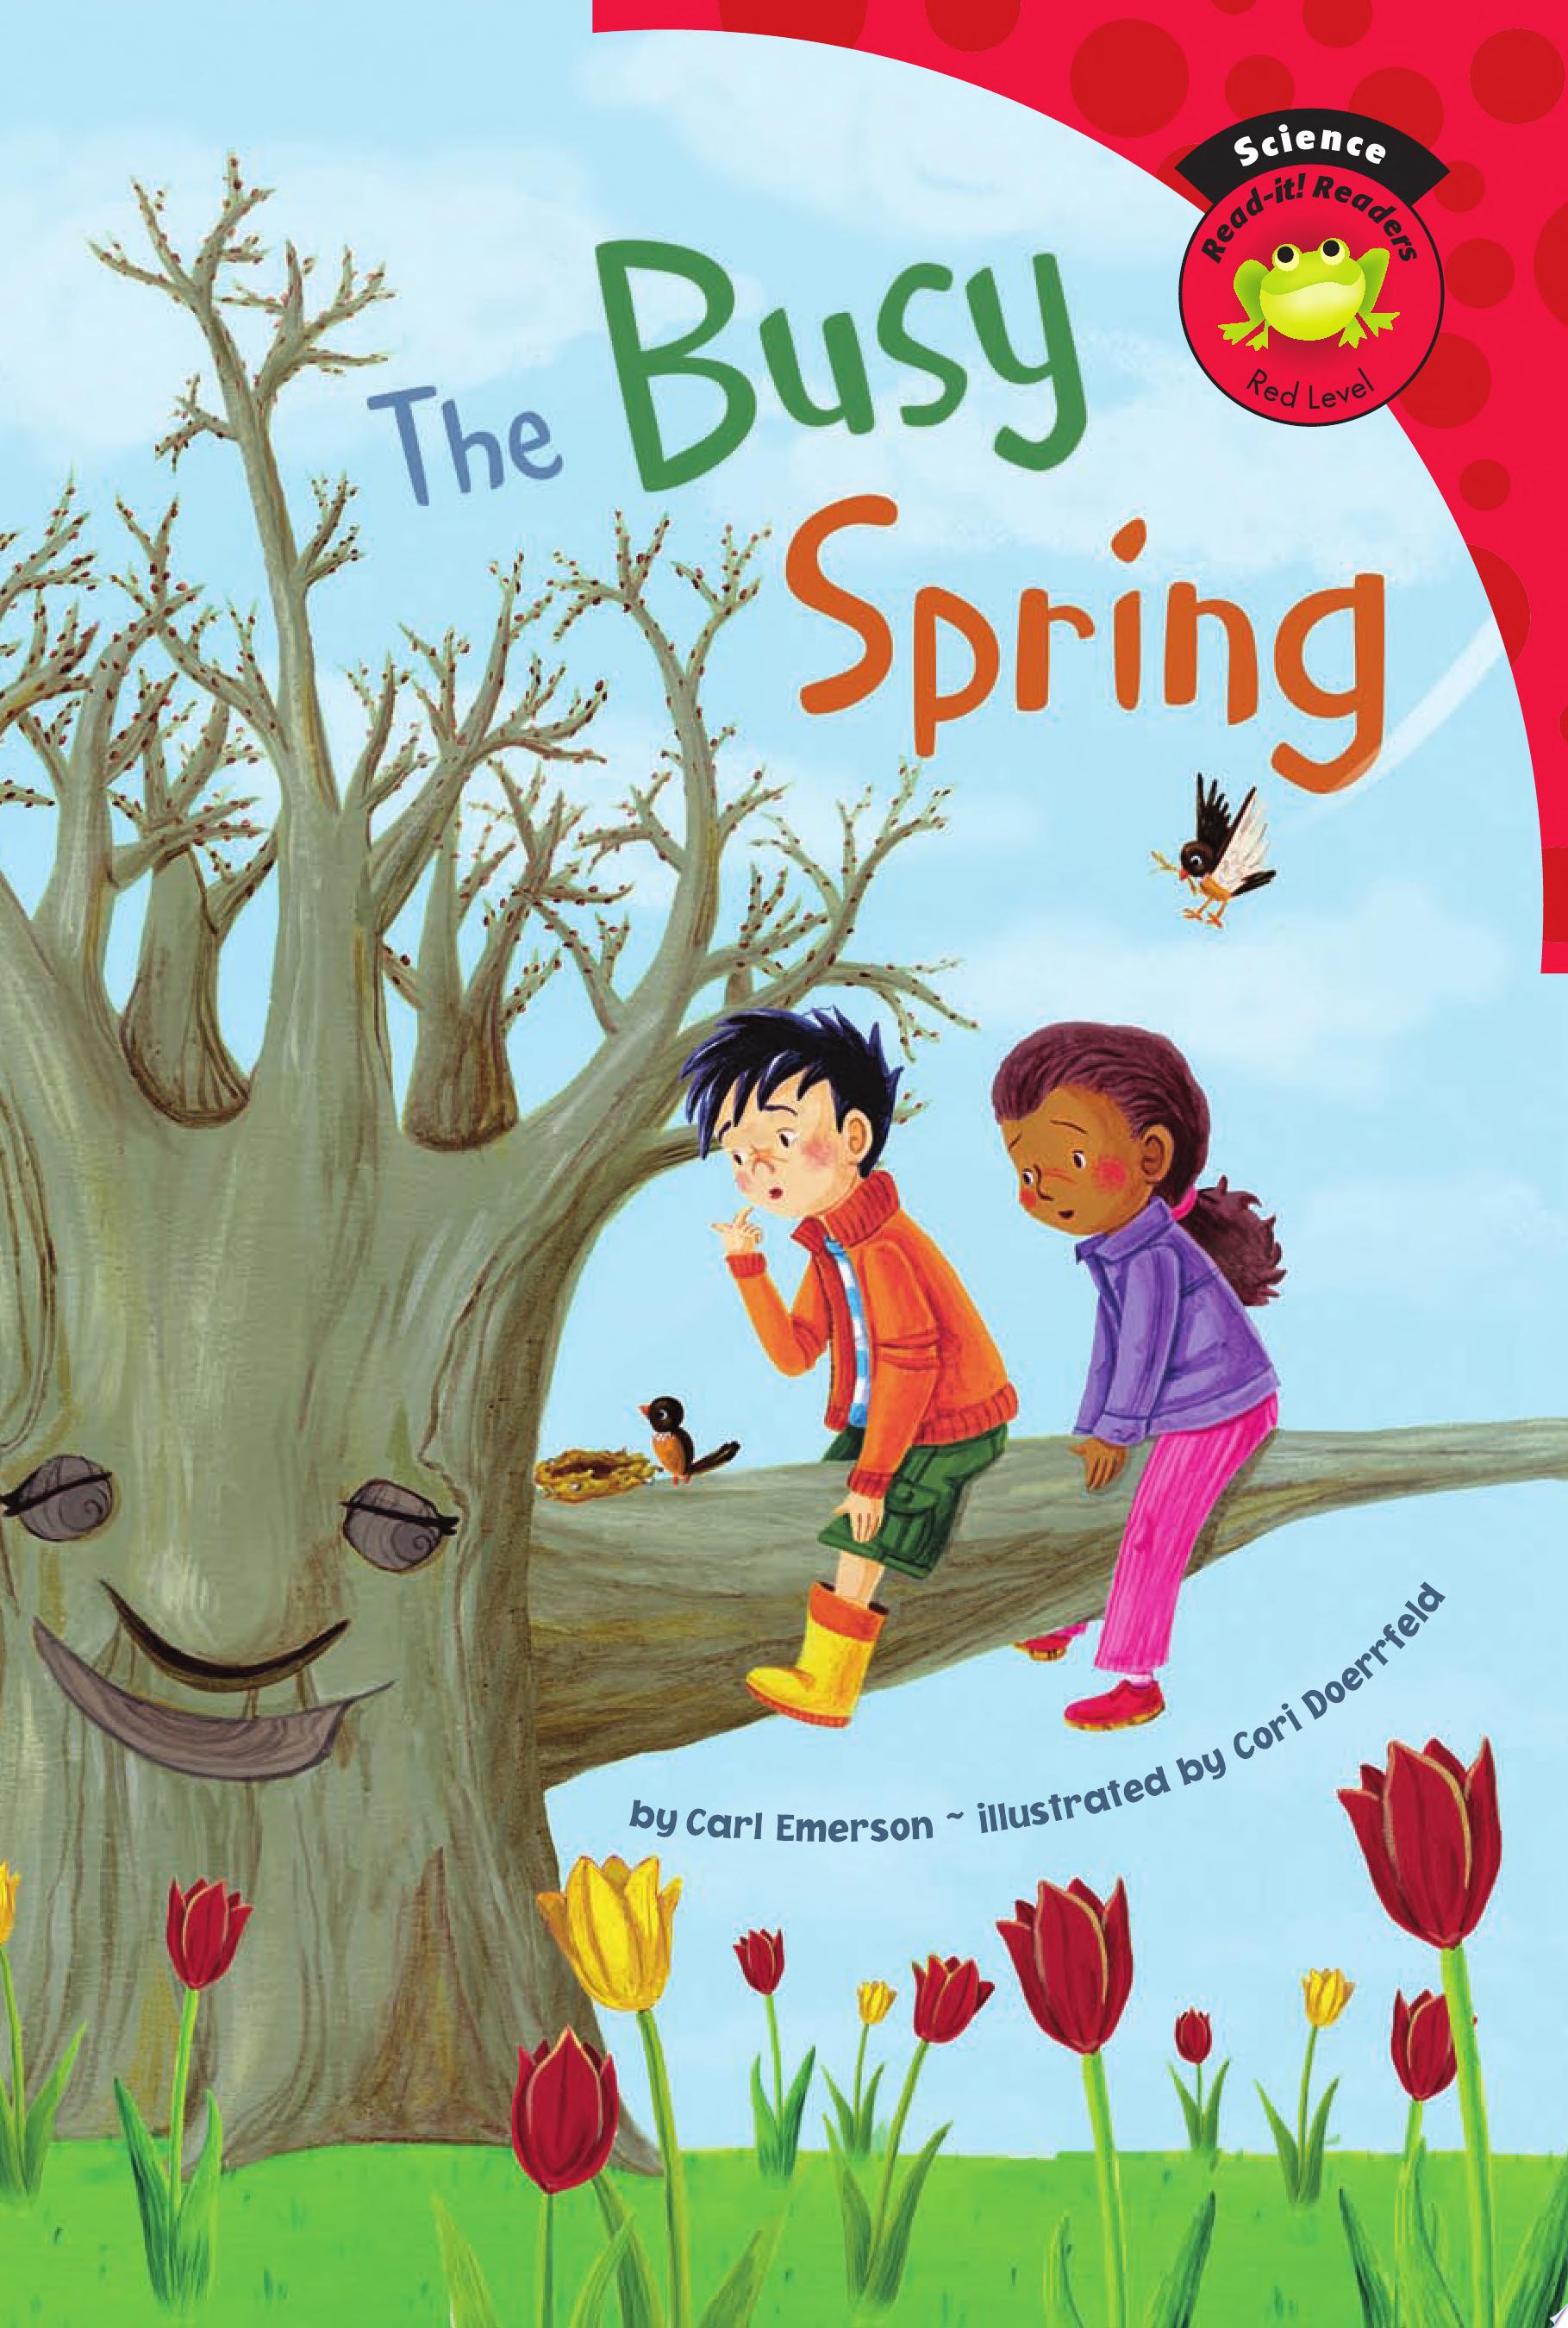 Image for "The Busy Spring"